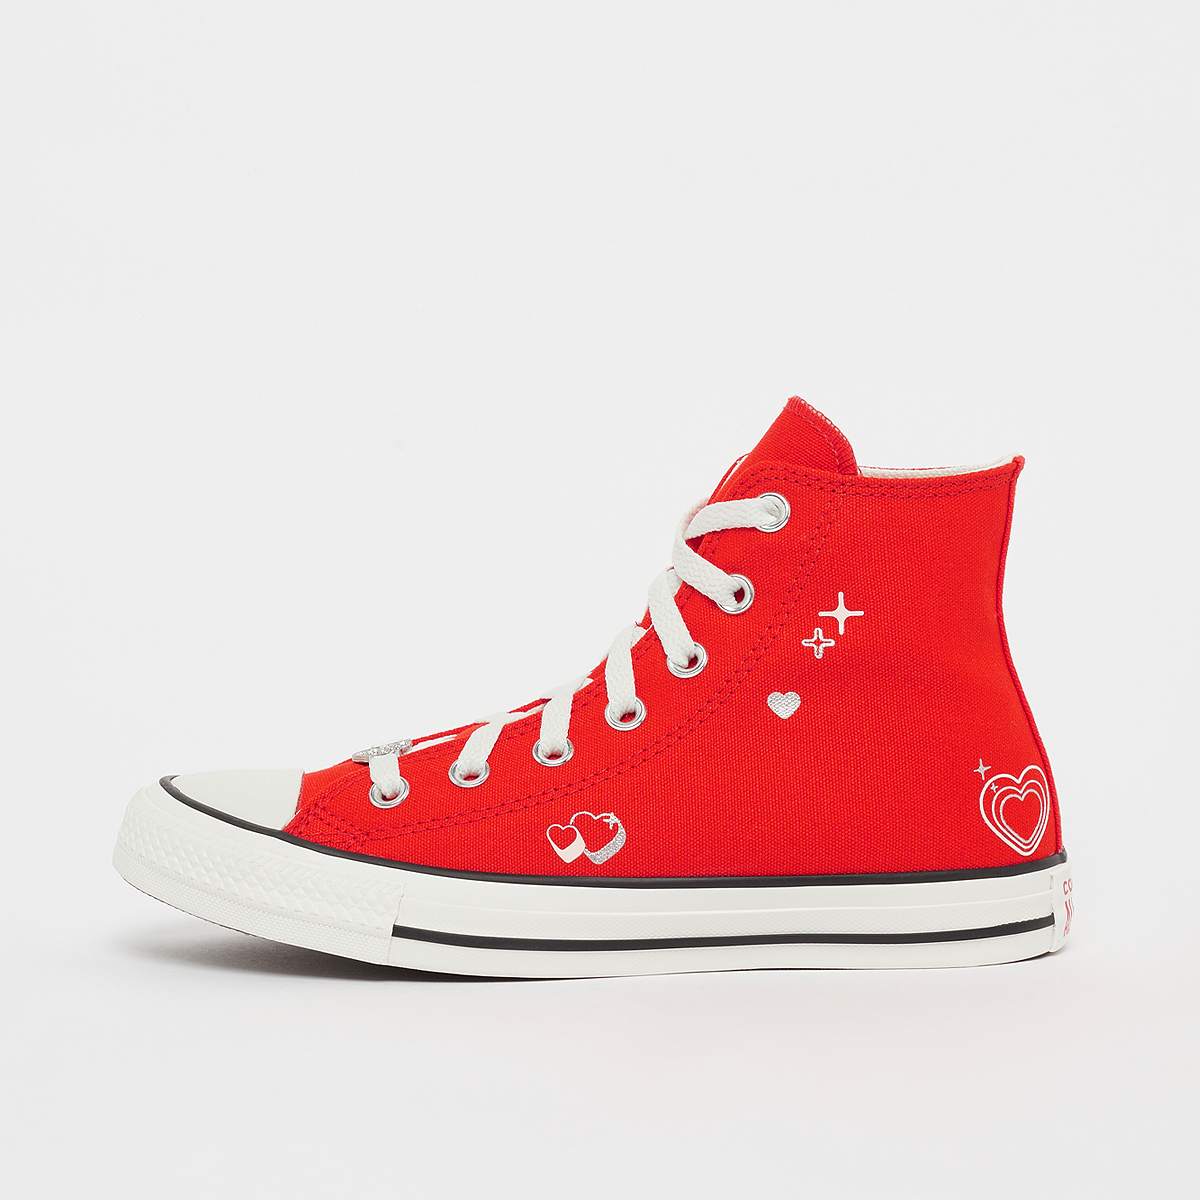 Chuck Taylor All Star, Converse, Footwear, fever dream/vintage white, taille: 36.5